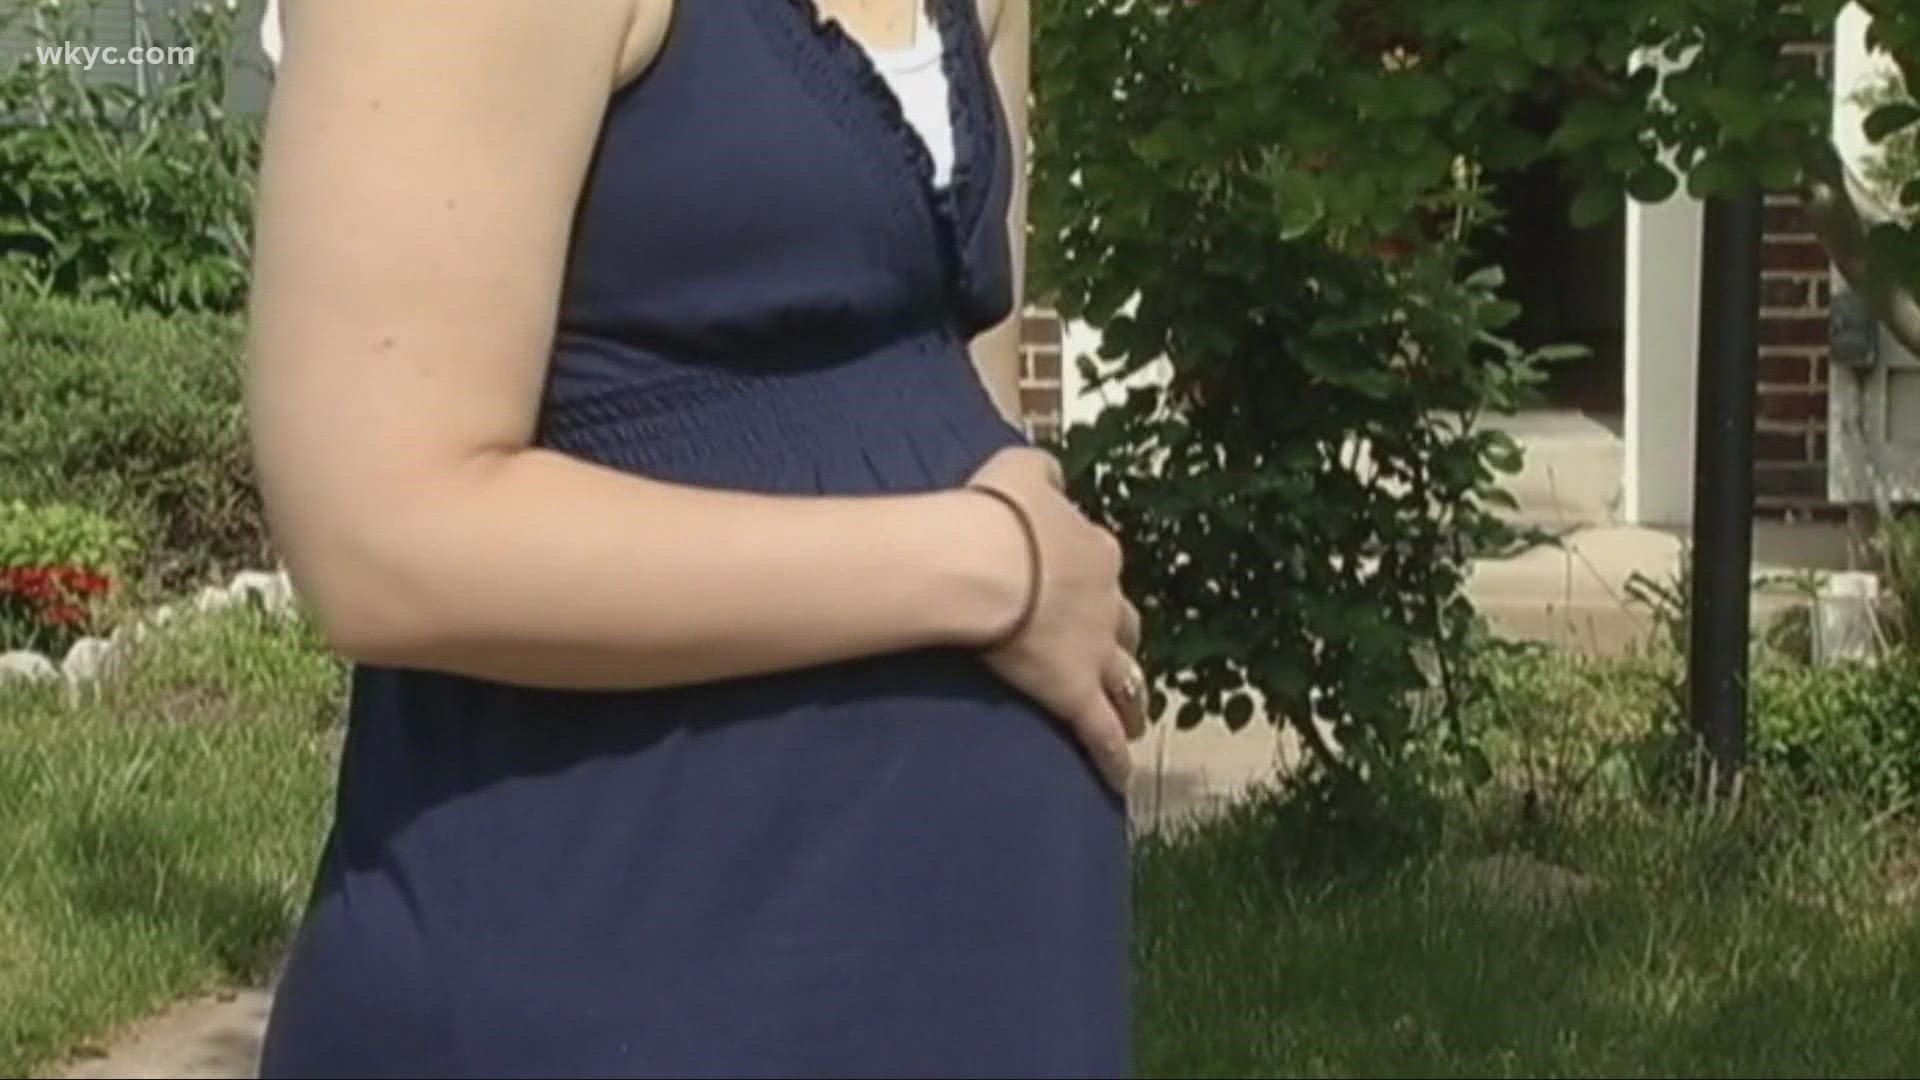 Those who contract the virus in pregnancy are also at greater risk of preterm birth. Monica Robins has the story.